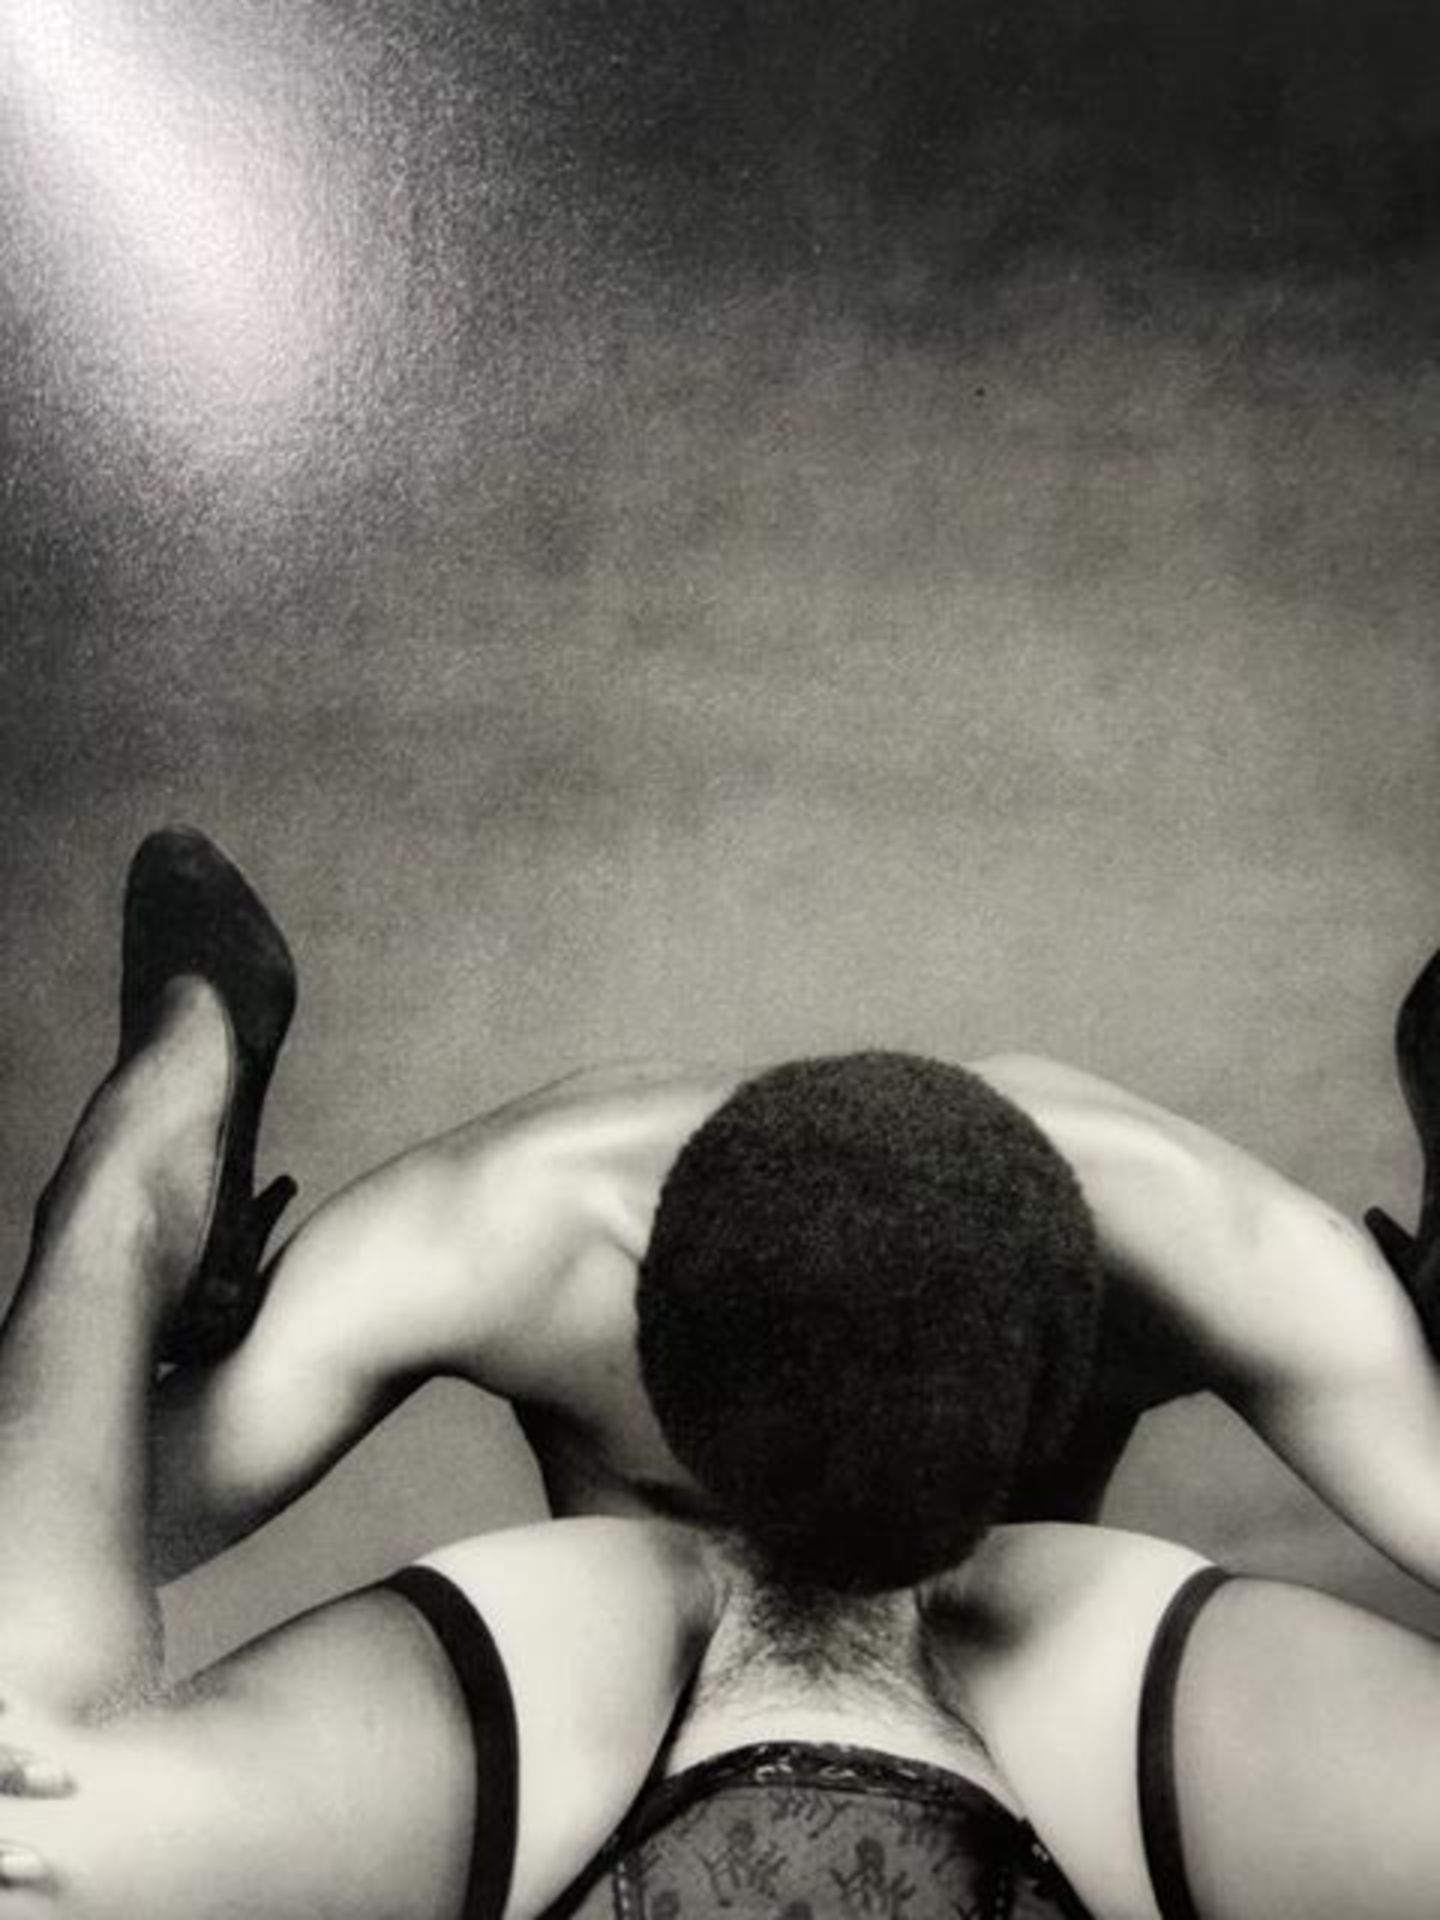 Robert Mapplethorpe "Marty and Veronica" Print. - Image 3 of 6